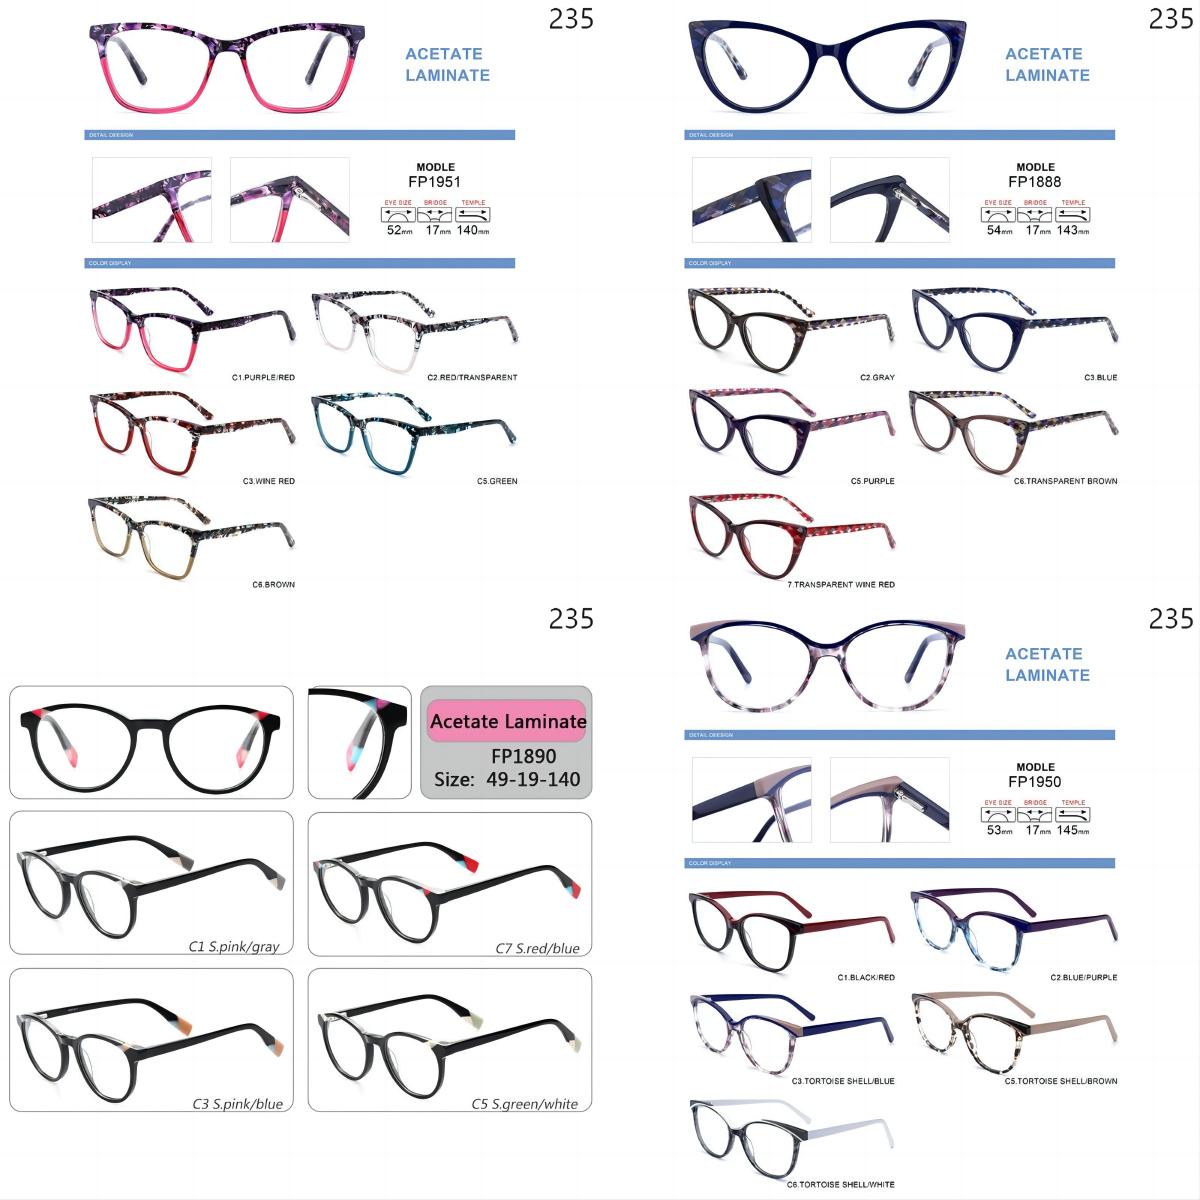 Dachuan Optical China Wholesale New Arrival Acetate Optcal Frame Ready Stock with Multiple Styles Catalog (51)